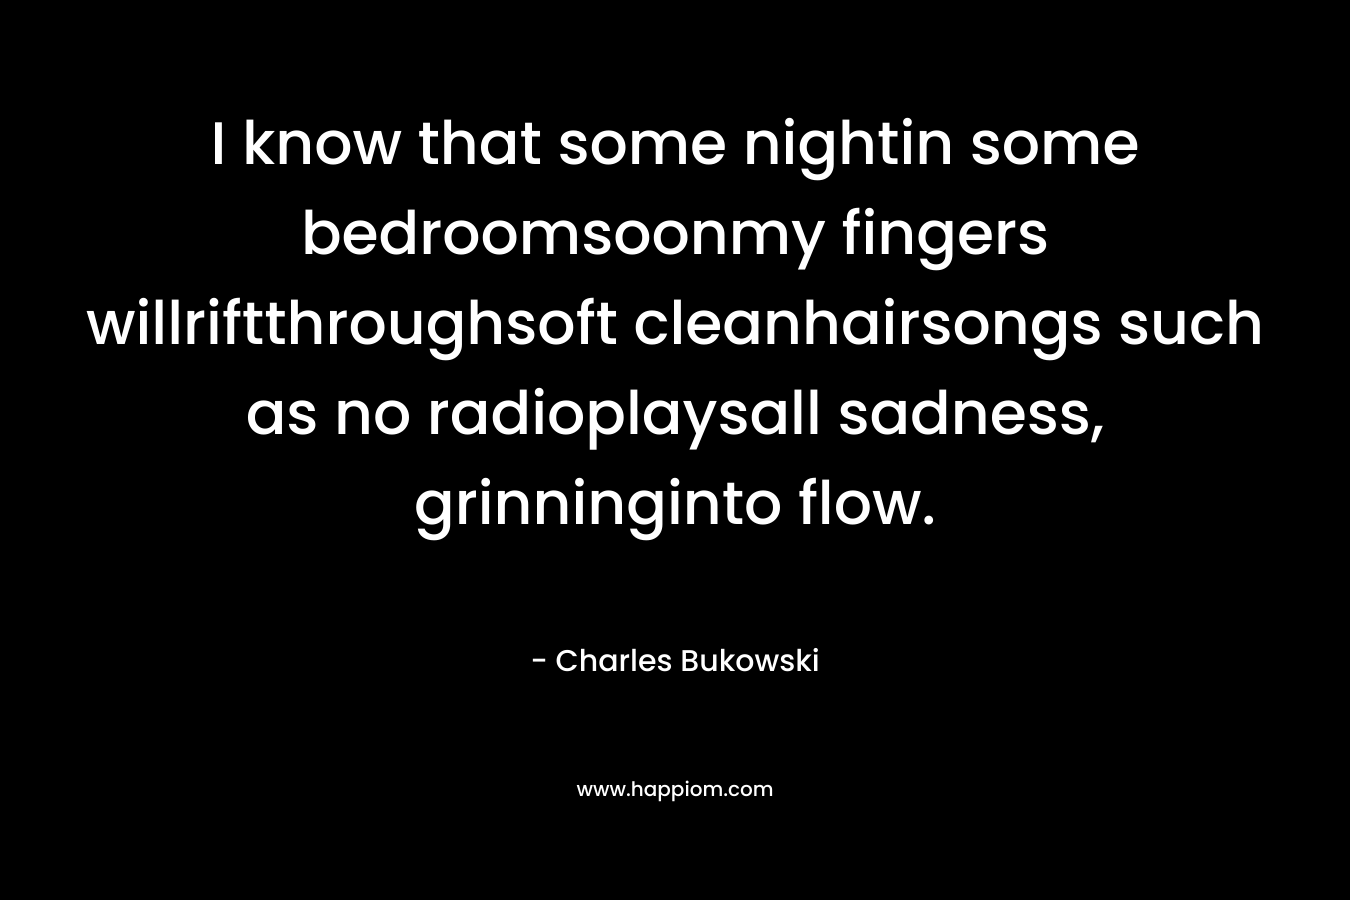 I know that some nightin some bedroomsoonmy fingers willriftthroughsoft cleanhairsongs such as no radioplaysall sadness, grinninginto flow.